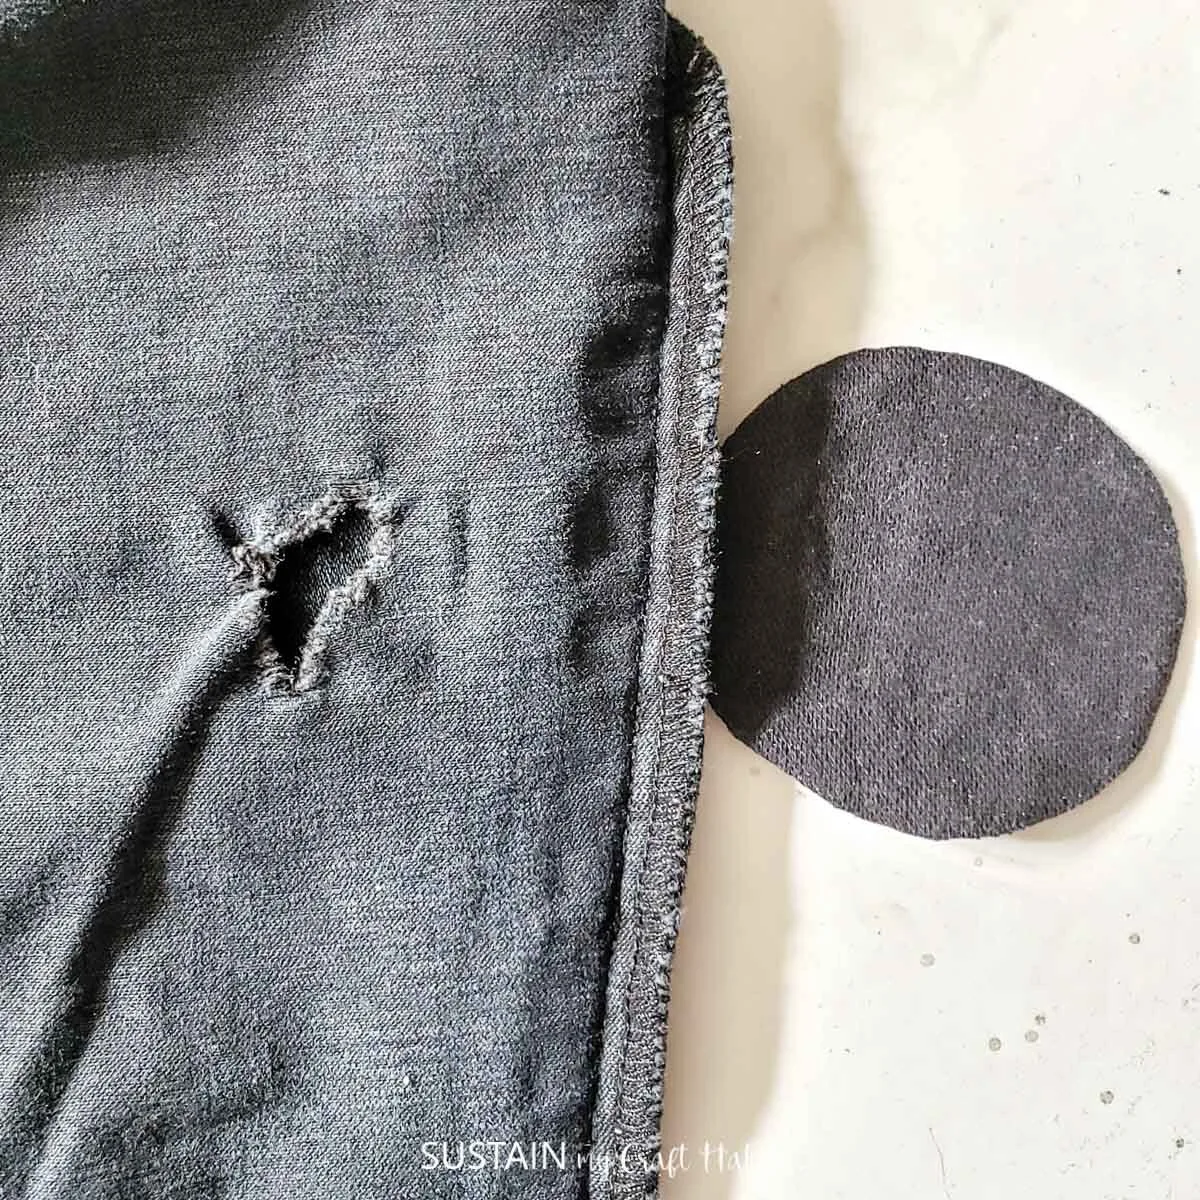 How to Repair a Tear in Fabric: Sewing Patches – Mother Earth News